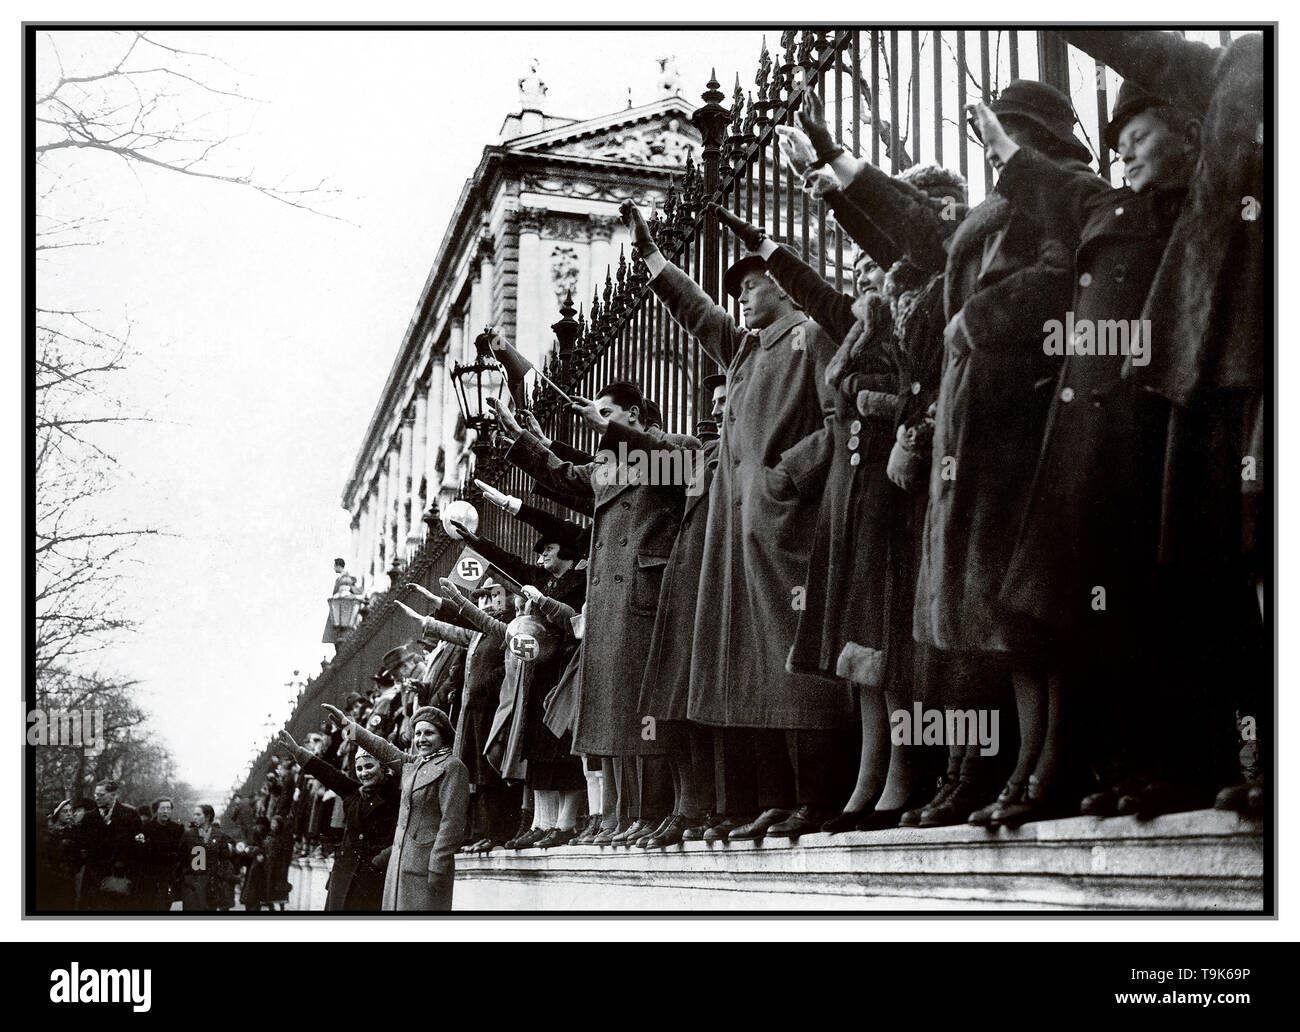 Archive 1938 B&W Propaganda image ”Anschluss'  Groups of Austrians waving swastika flags and saluting Heil Hitler greet the Nazi German forces annexation & occupation of Austria.  Anschluss refers to the annexation of Austria into Nazi Germany on 12 March 1938. The German spelling was Anschluß and it was also known as the Anschluss Österreichs Stock Photo